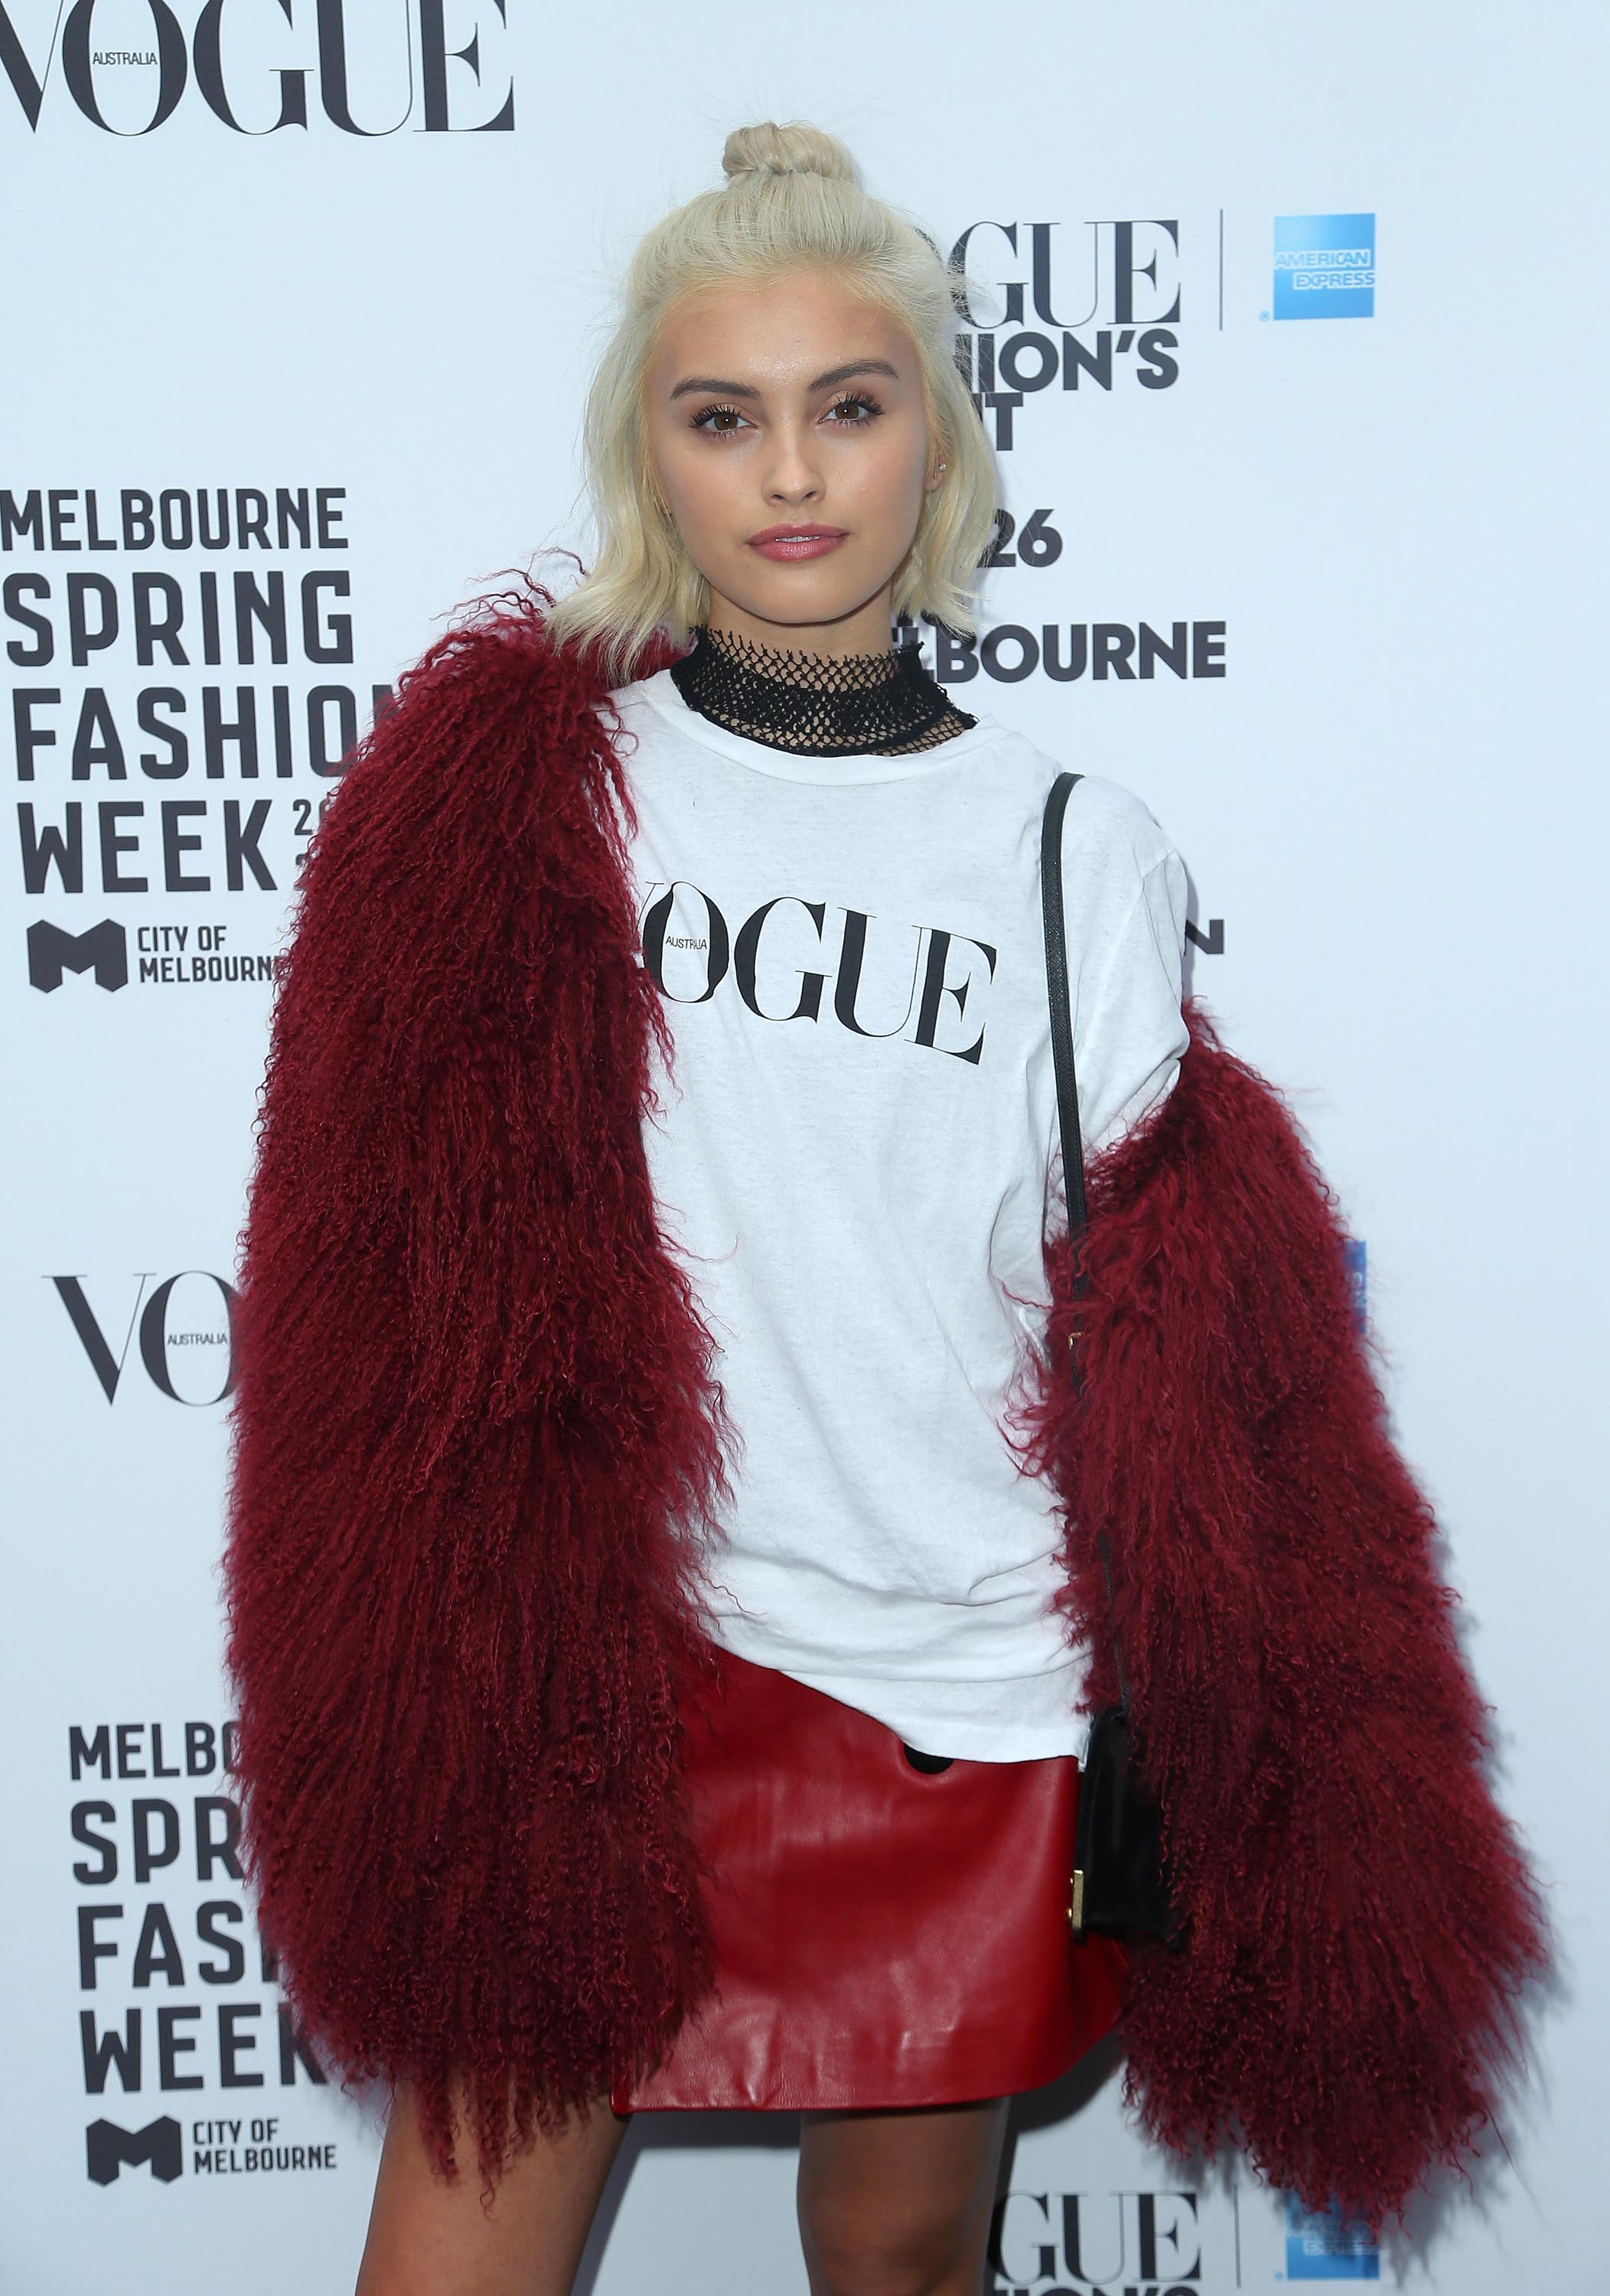 Sarah Ellen attends Vogue American Express Fashion’s Night Out